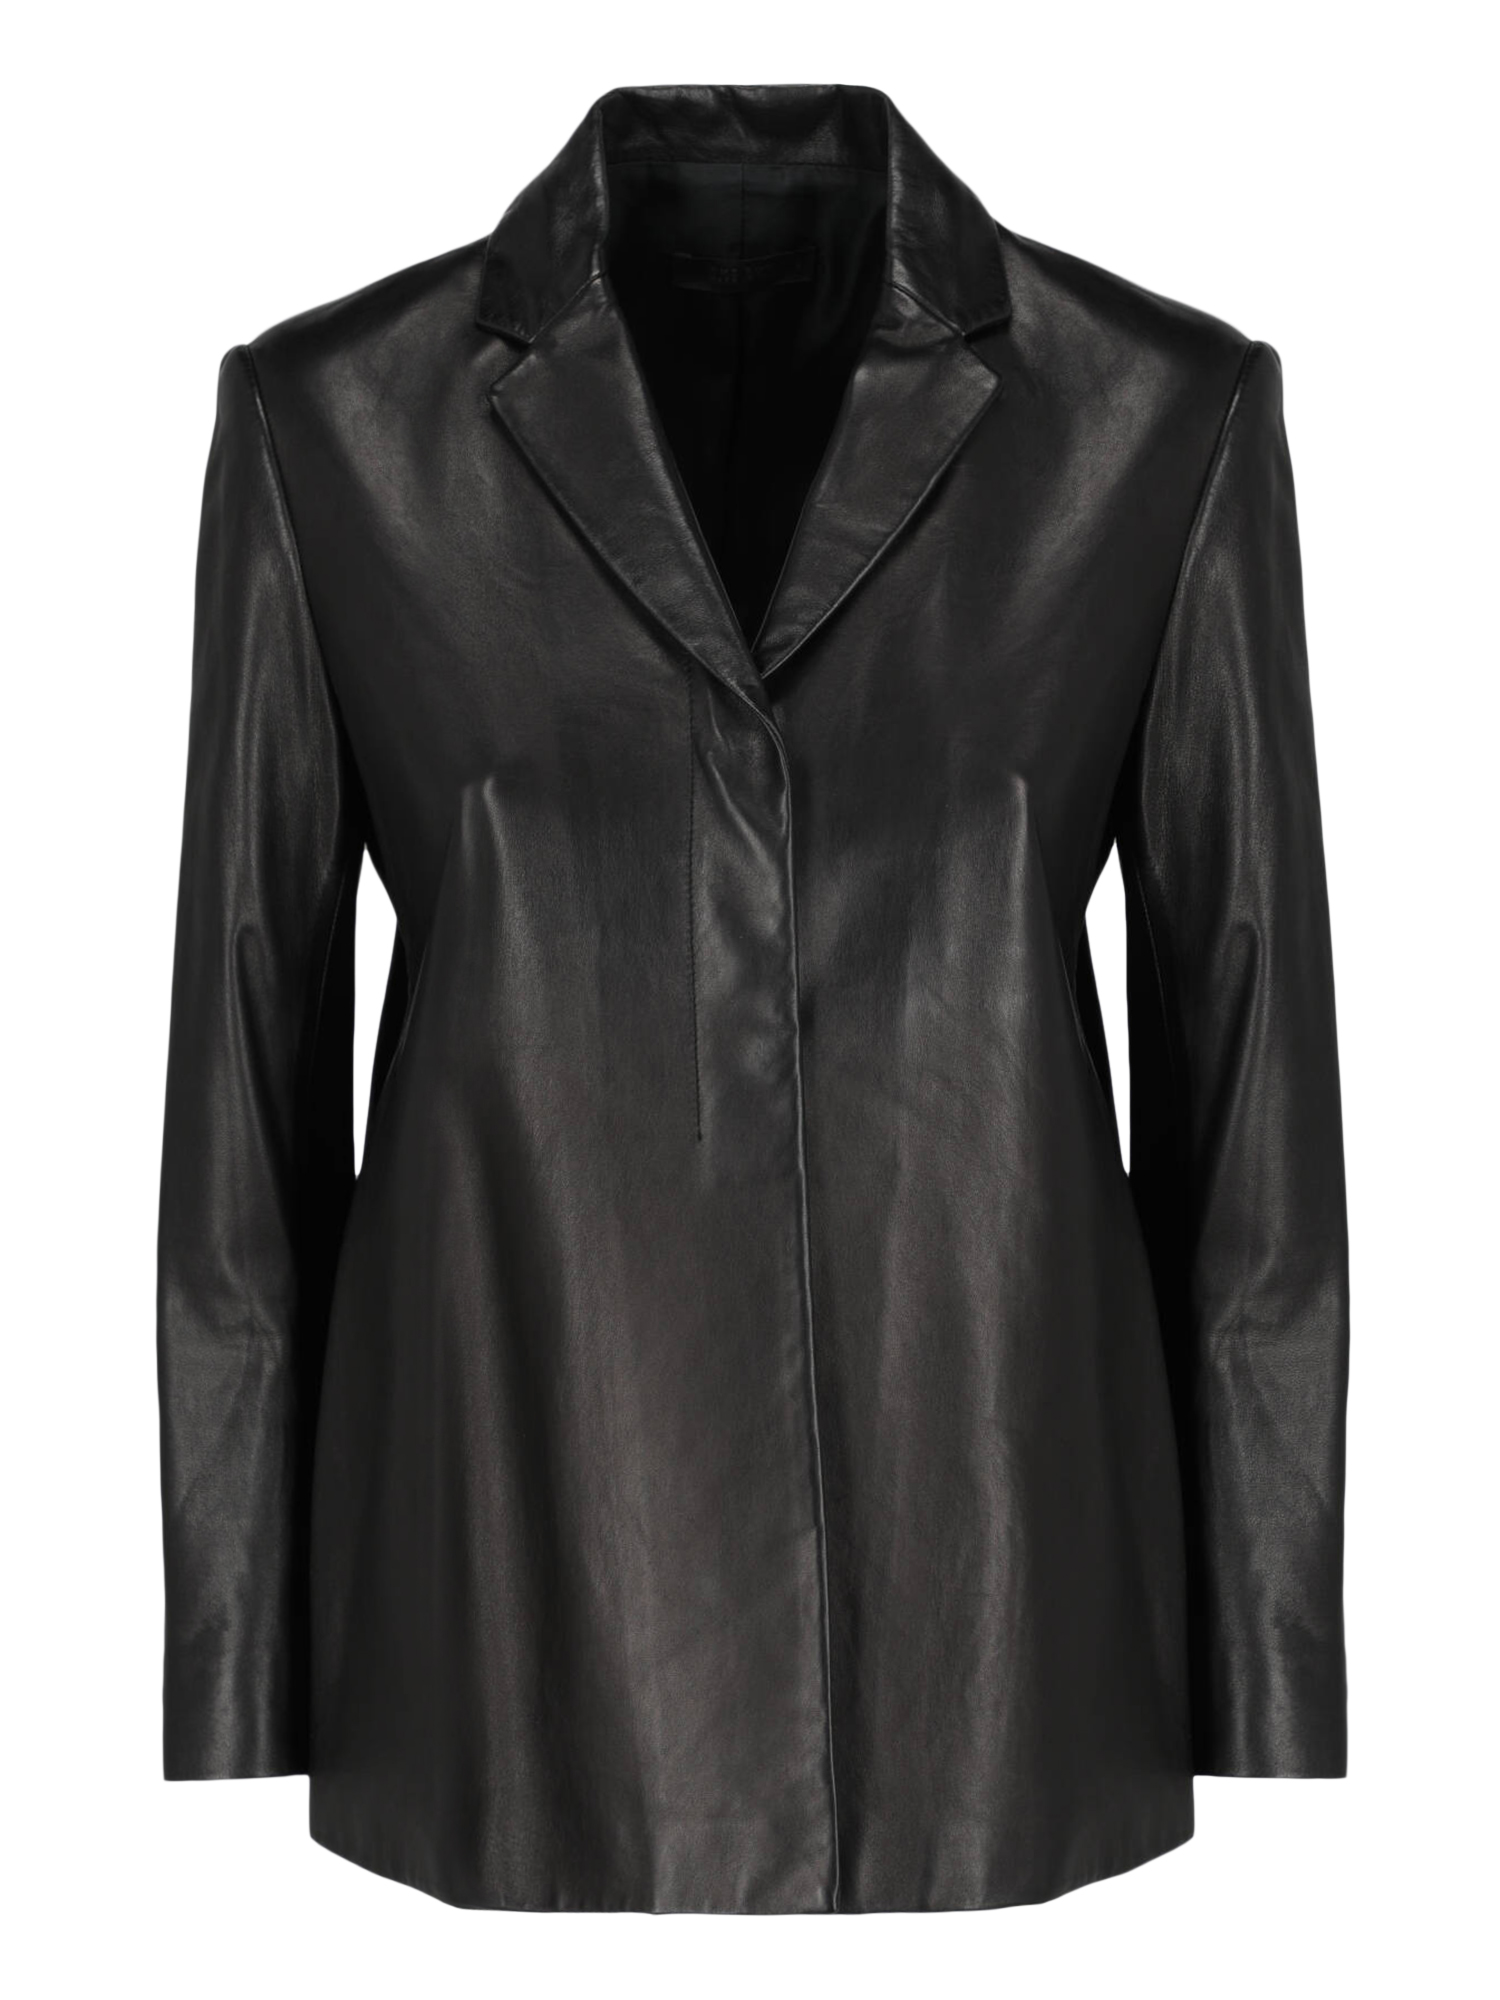 Pre-owned The Row Women's Jackets -  - In Black Leather